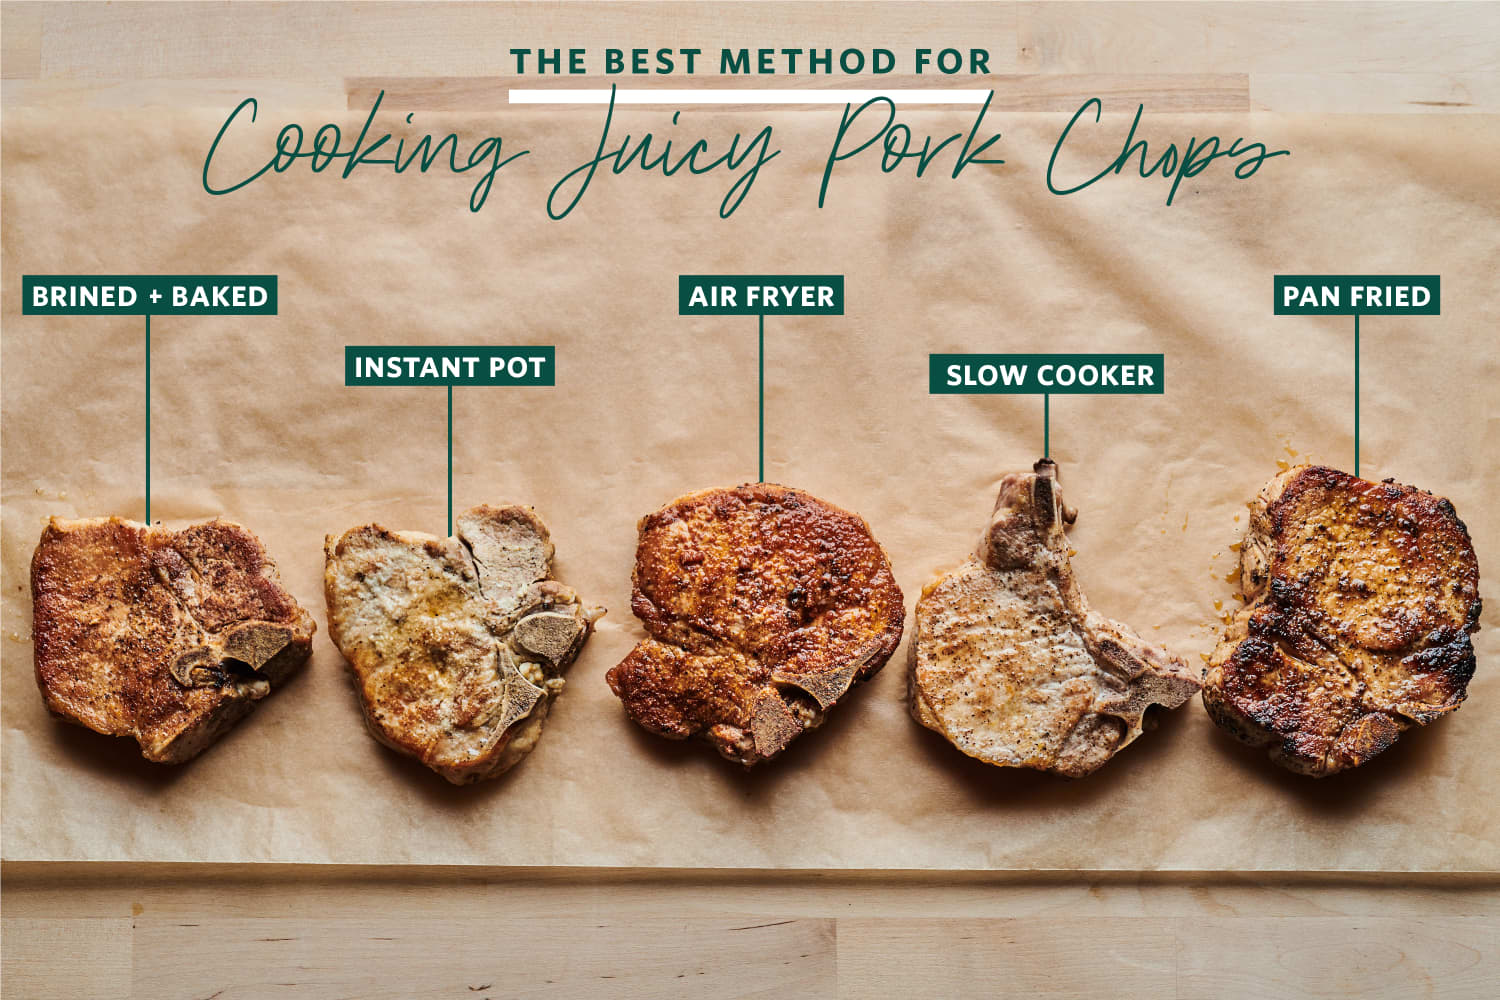 We Tried 5 Methods for Cooking Juicy Pork Chops and the Easiest Won by a Landslide